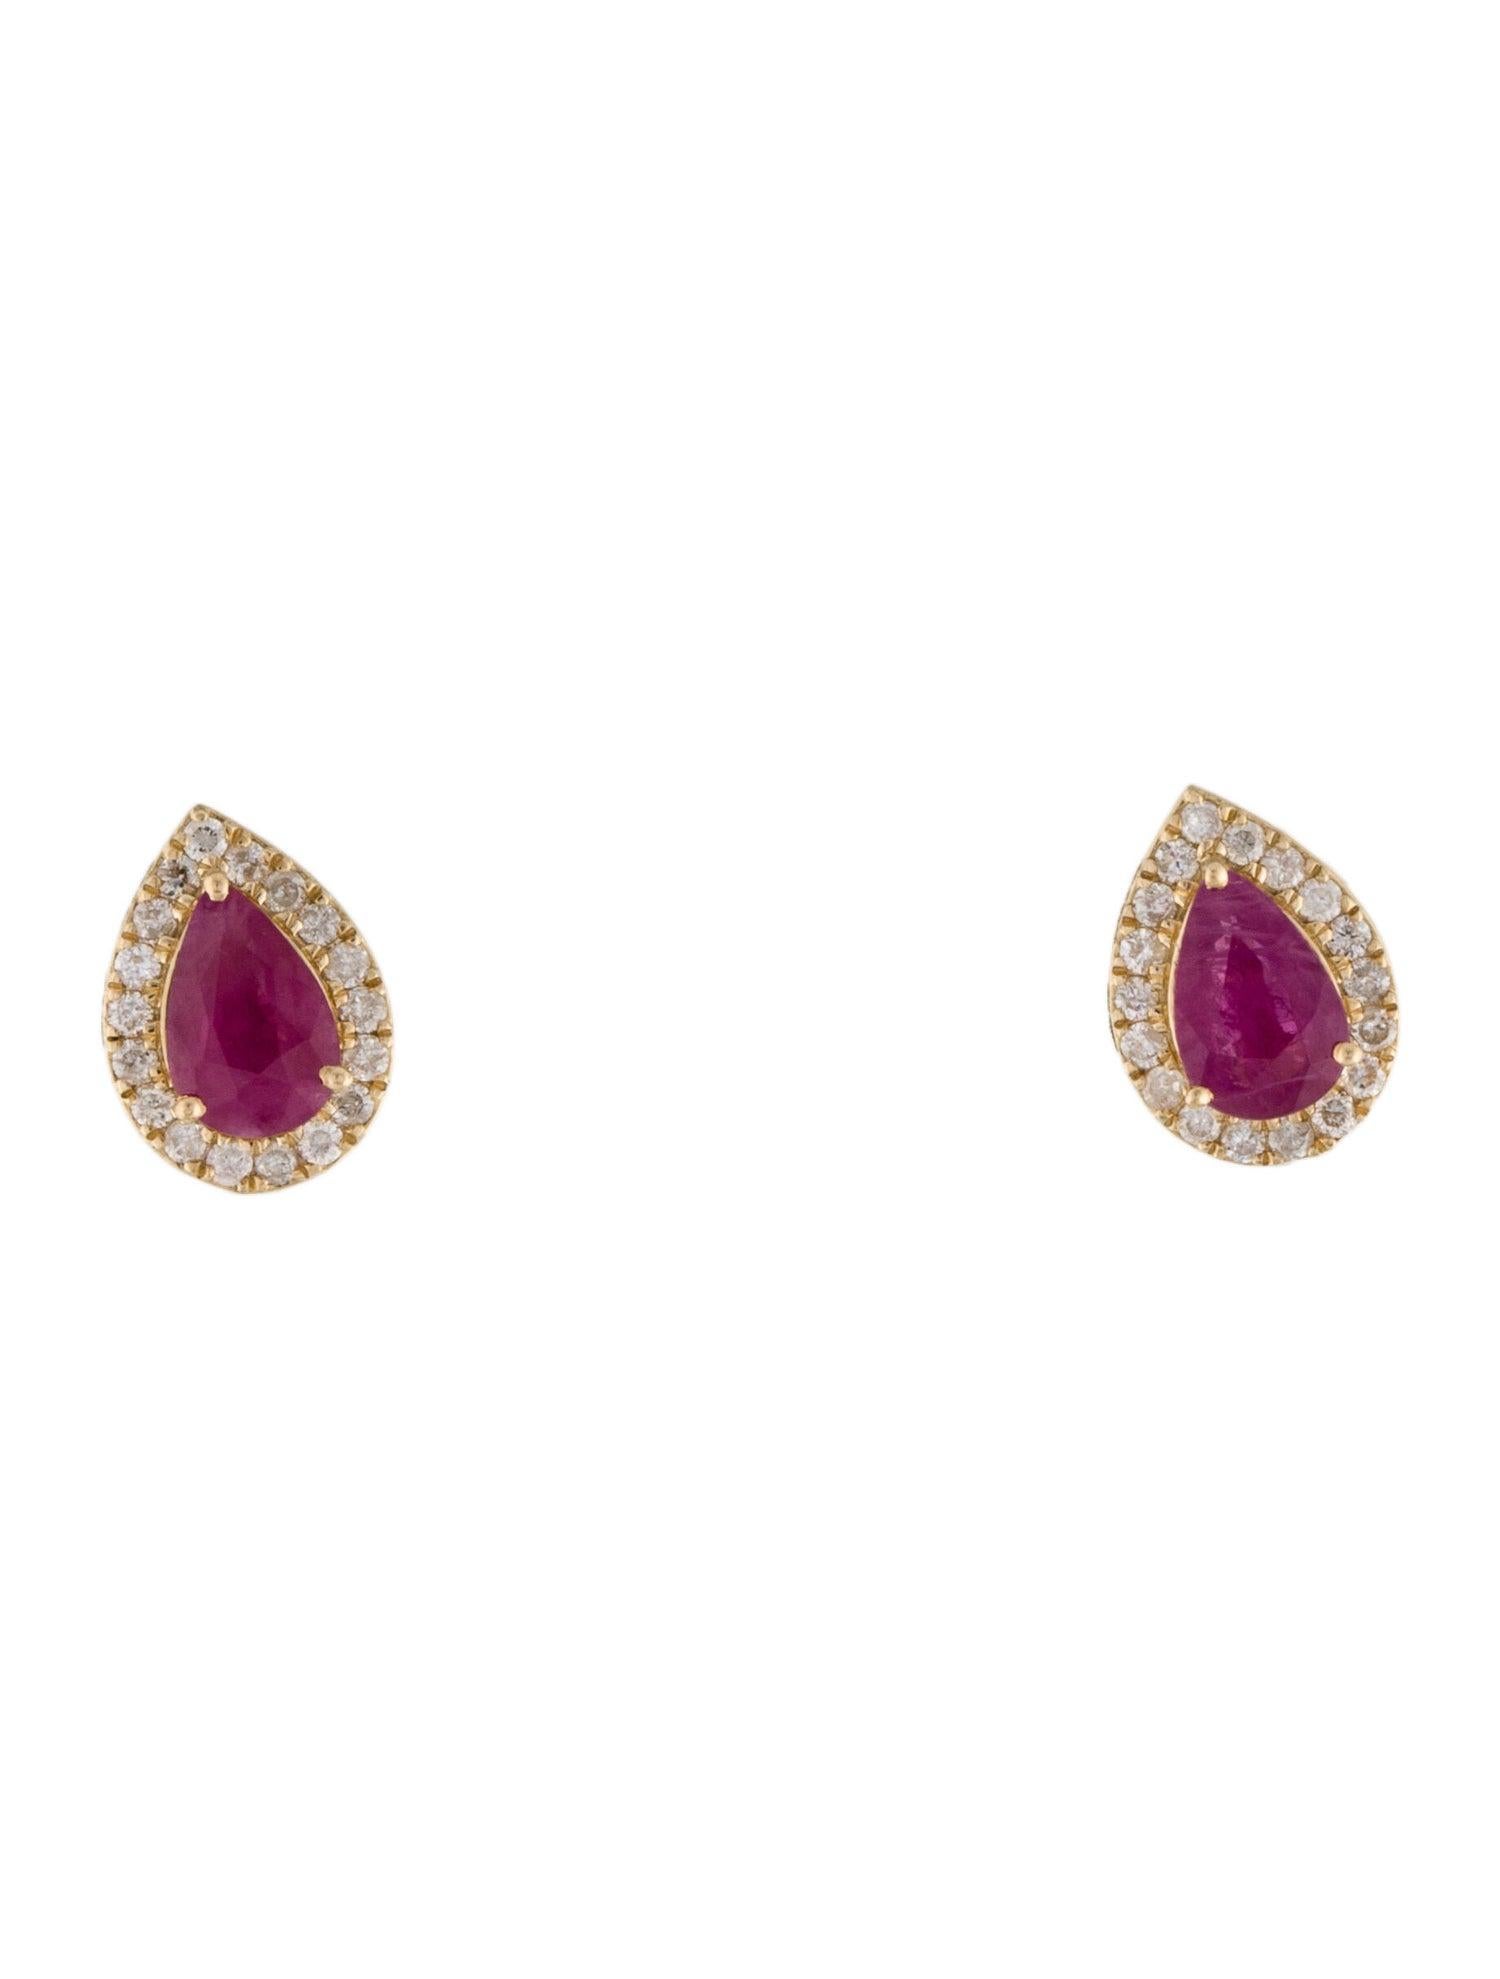 Indulge in the fiery allure of our Blooms of Passion collection with these exquisite ruby and diamond earrings. Crafted with precision and passion, these earrings are a celebration of vibrant beauty and timeless elegance.

The rich, red hue of the